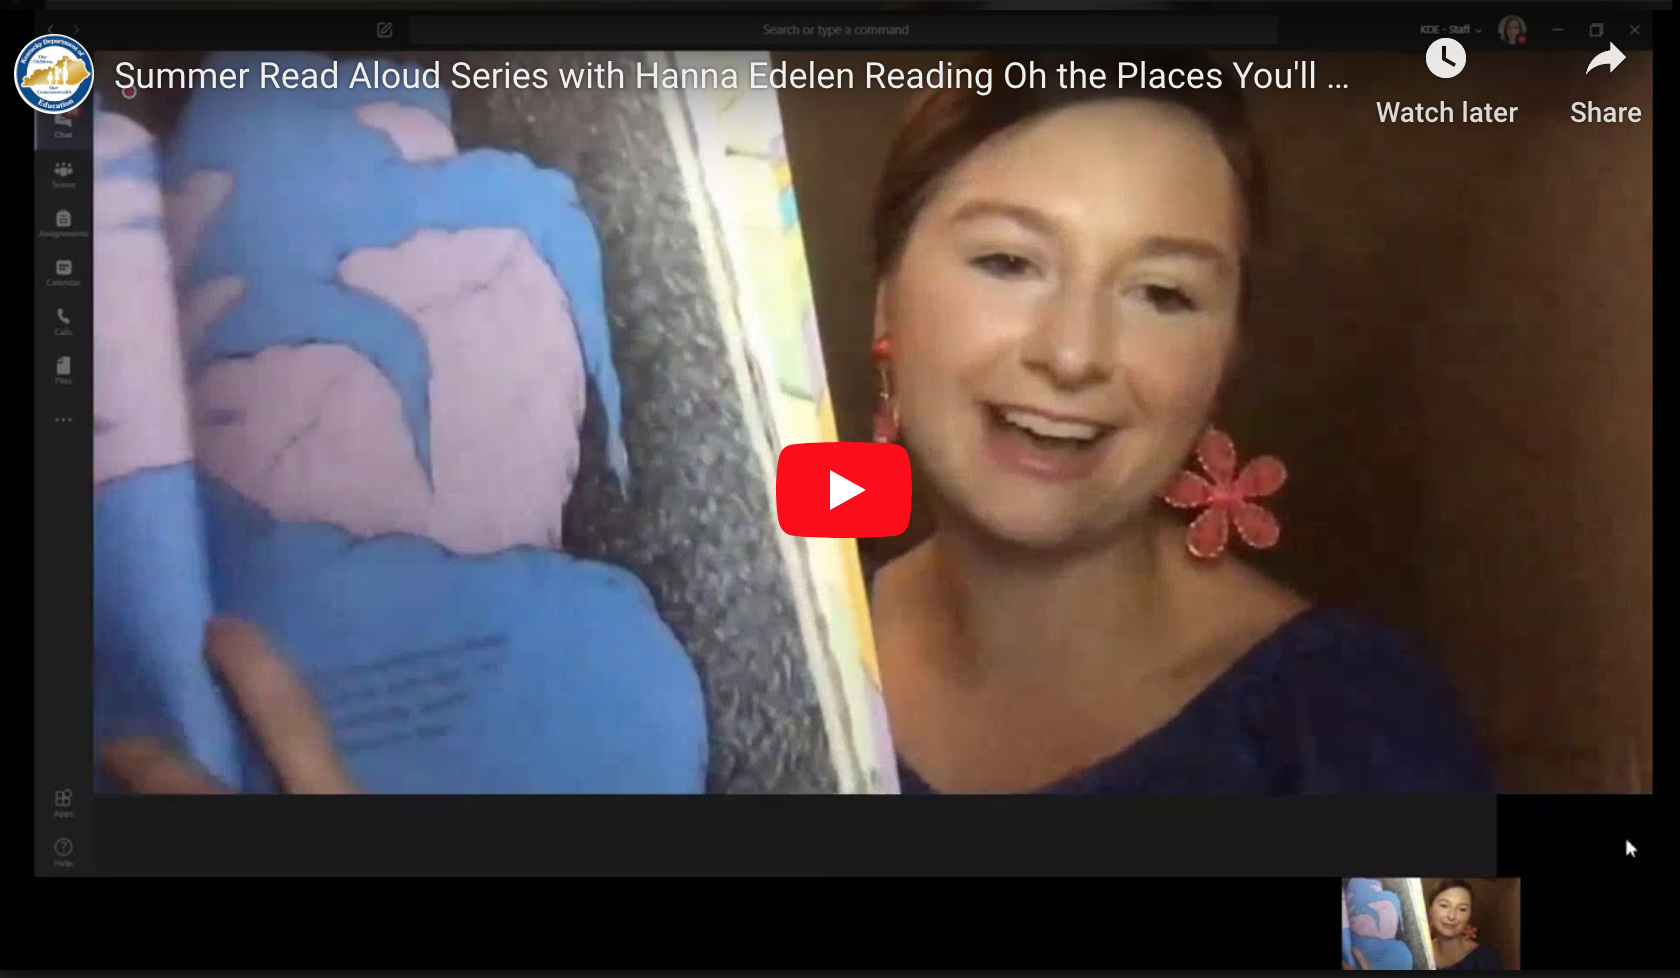 Hannah Edelen reading Oh the Places You'll Go! by Dr. Seuss